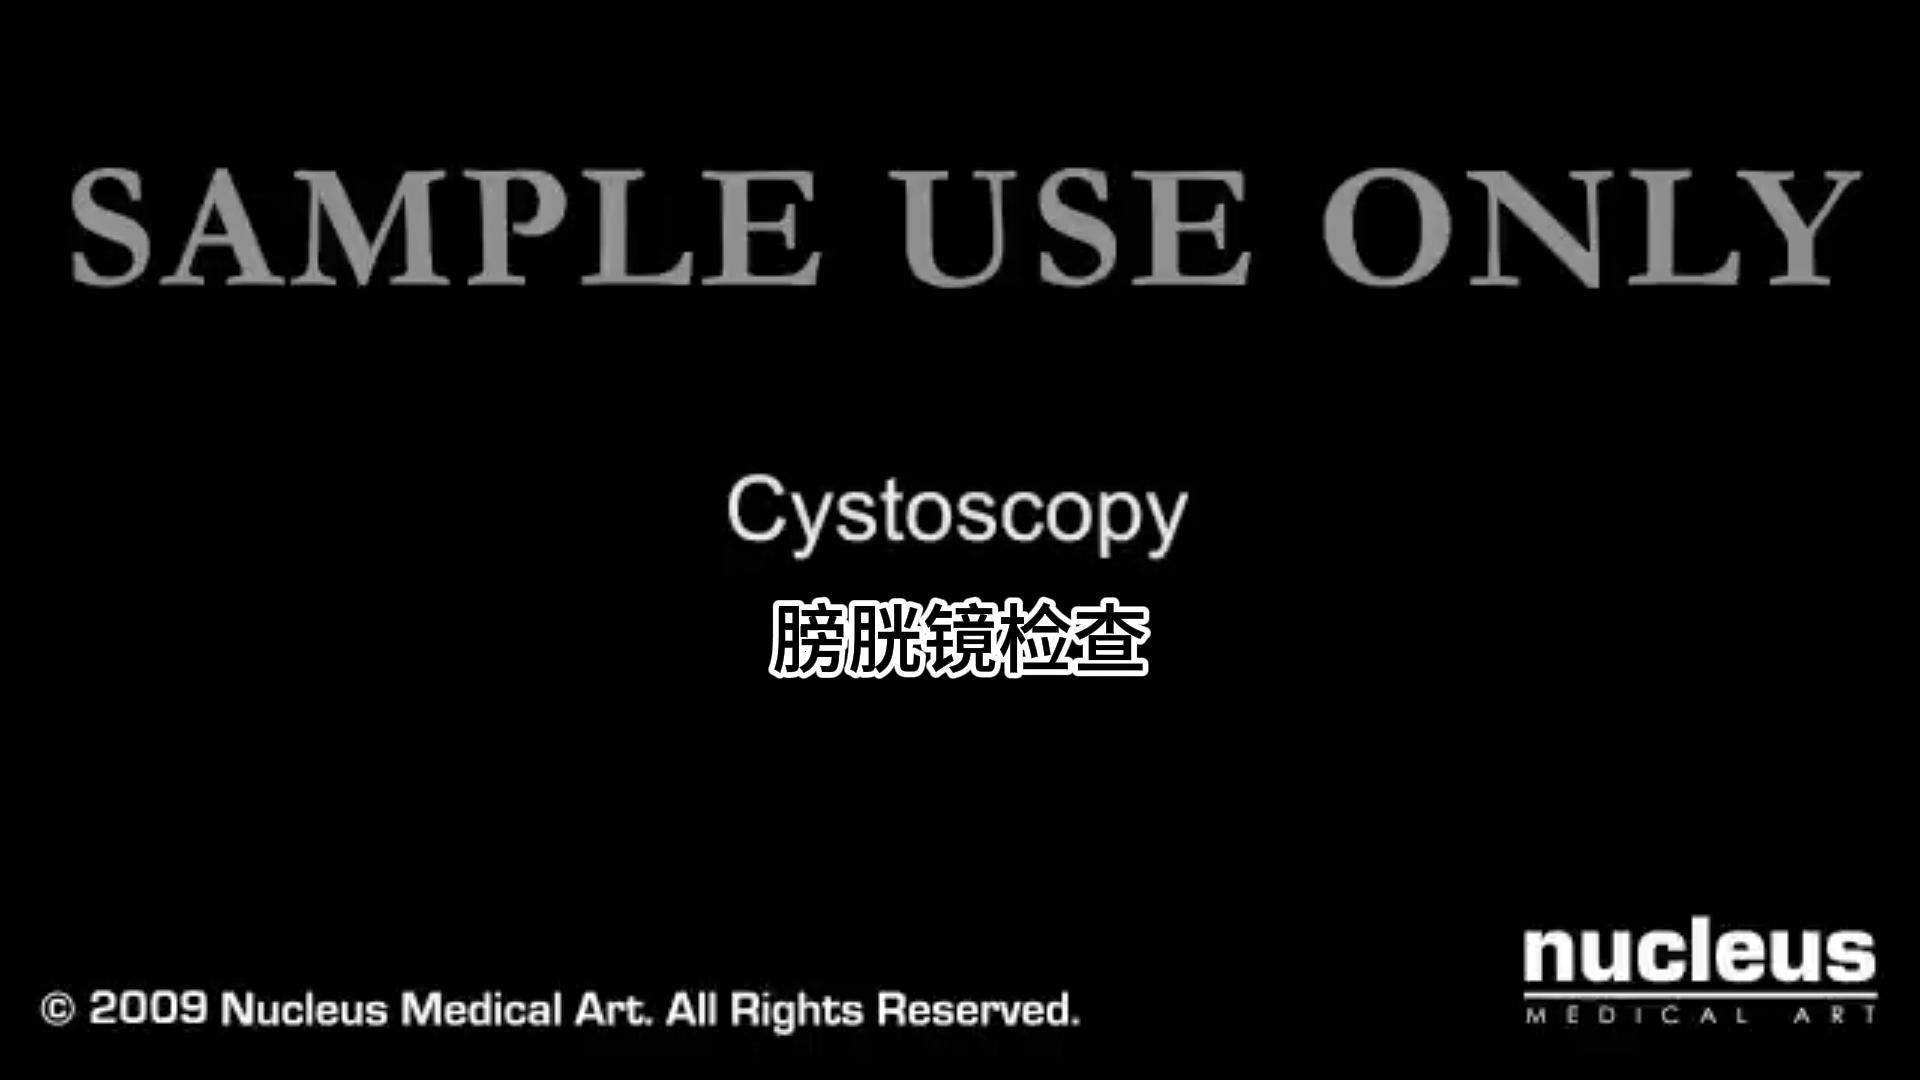 The whole process and purpose of cystoscopy